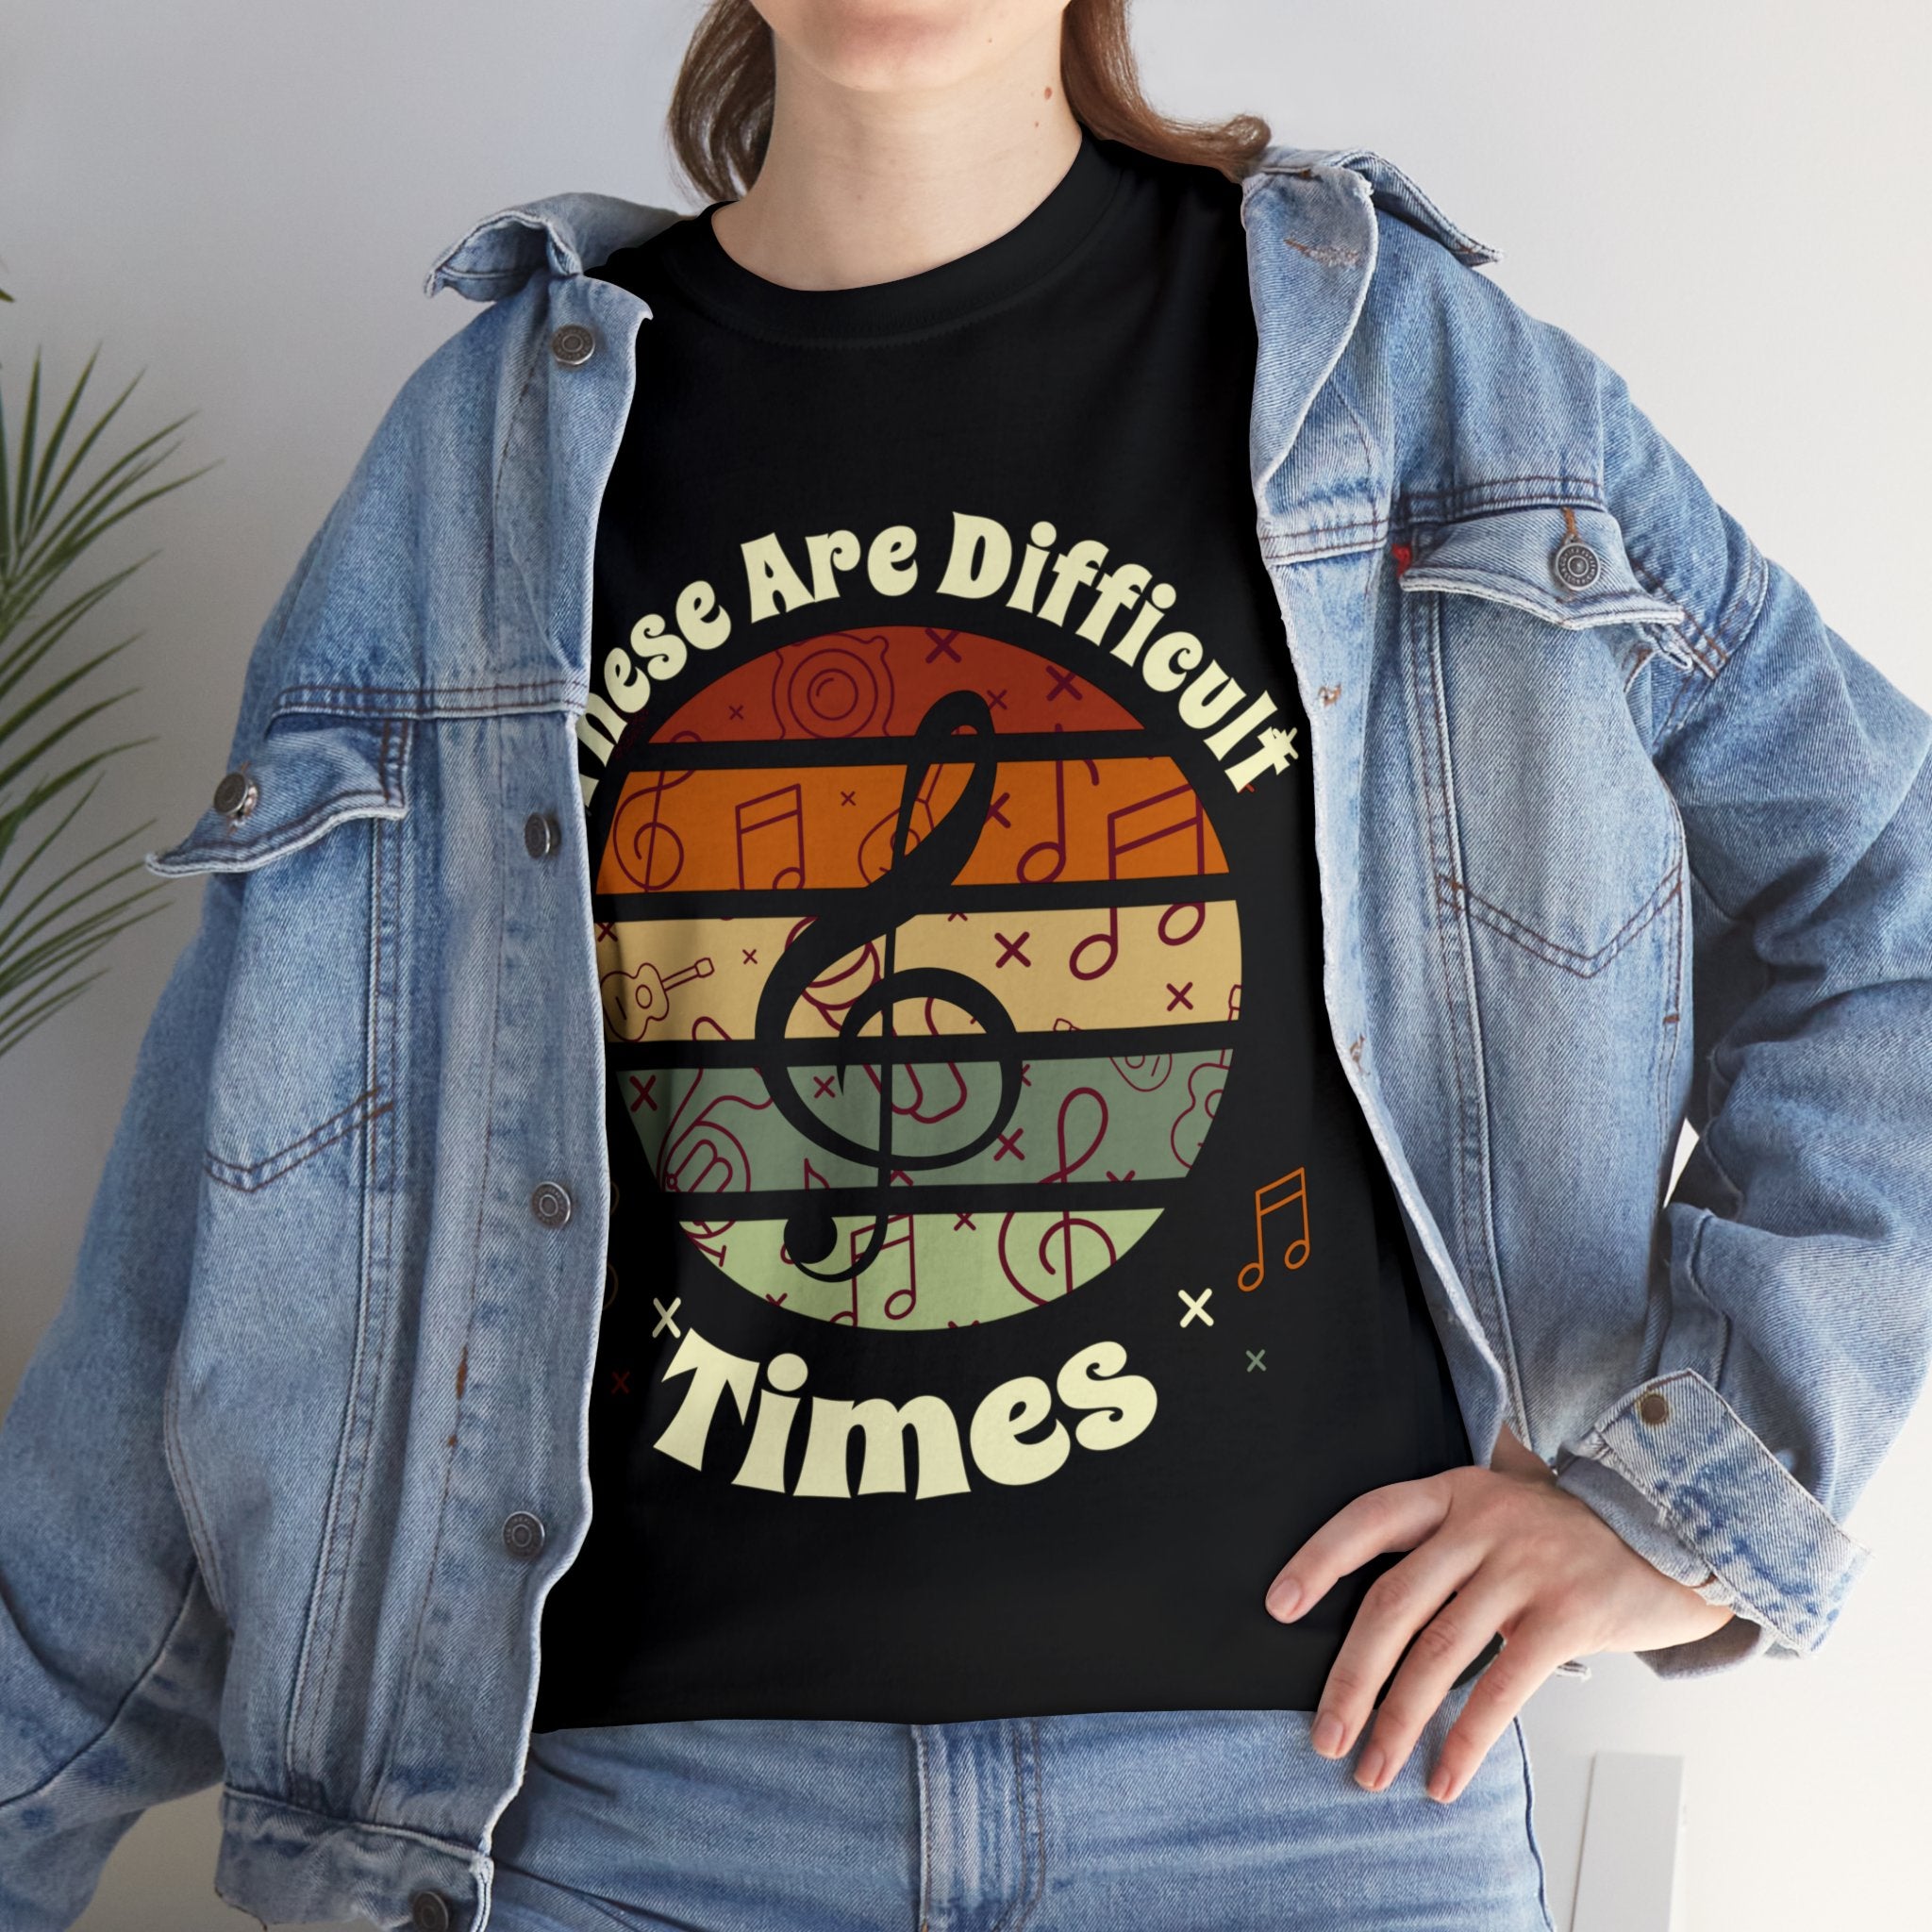 These Are Difficult Times Music Lover Gifts T-Shirt